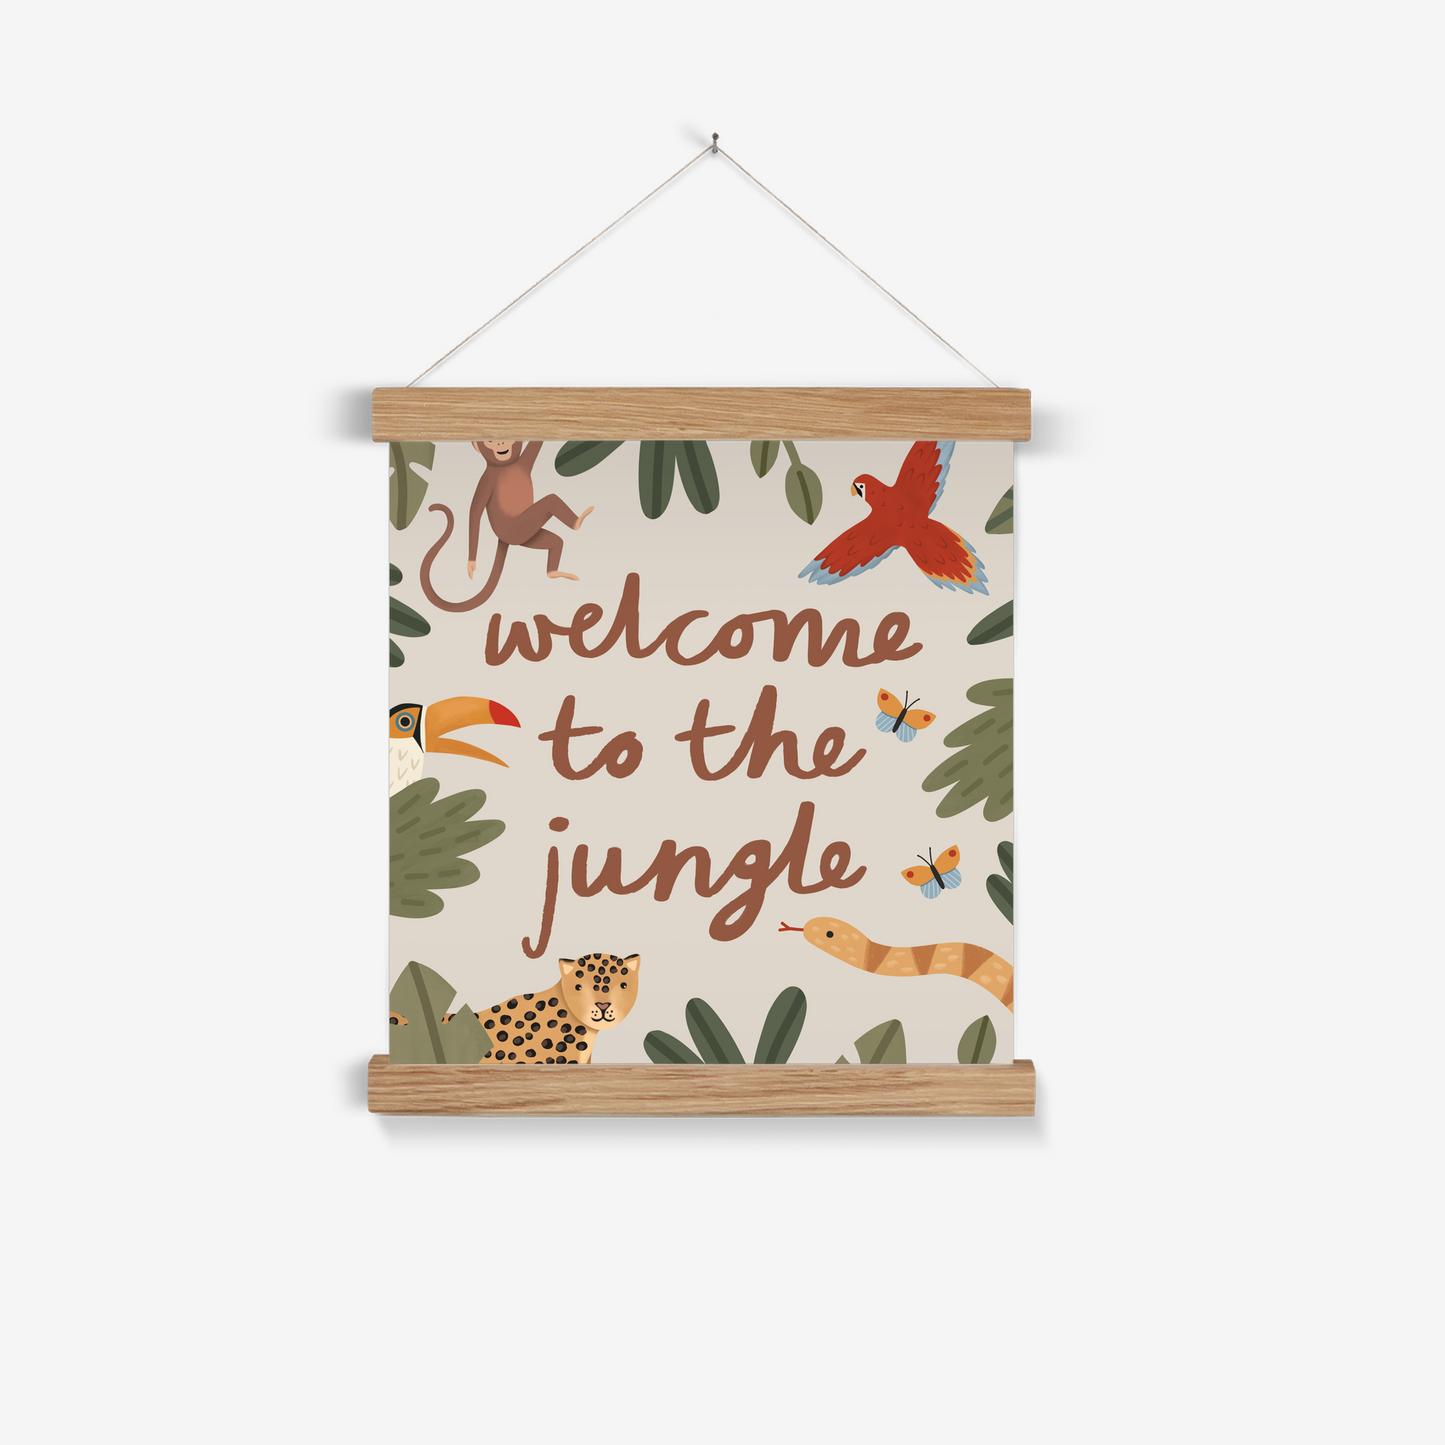 Welcome to the jungle in stone / Print with Hanger